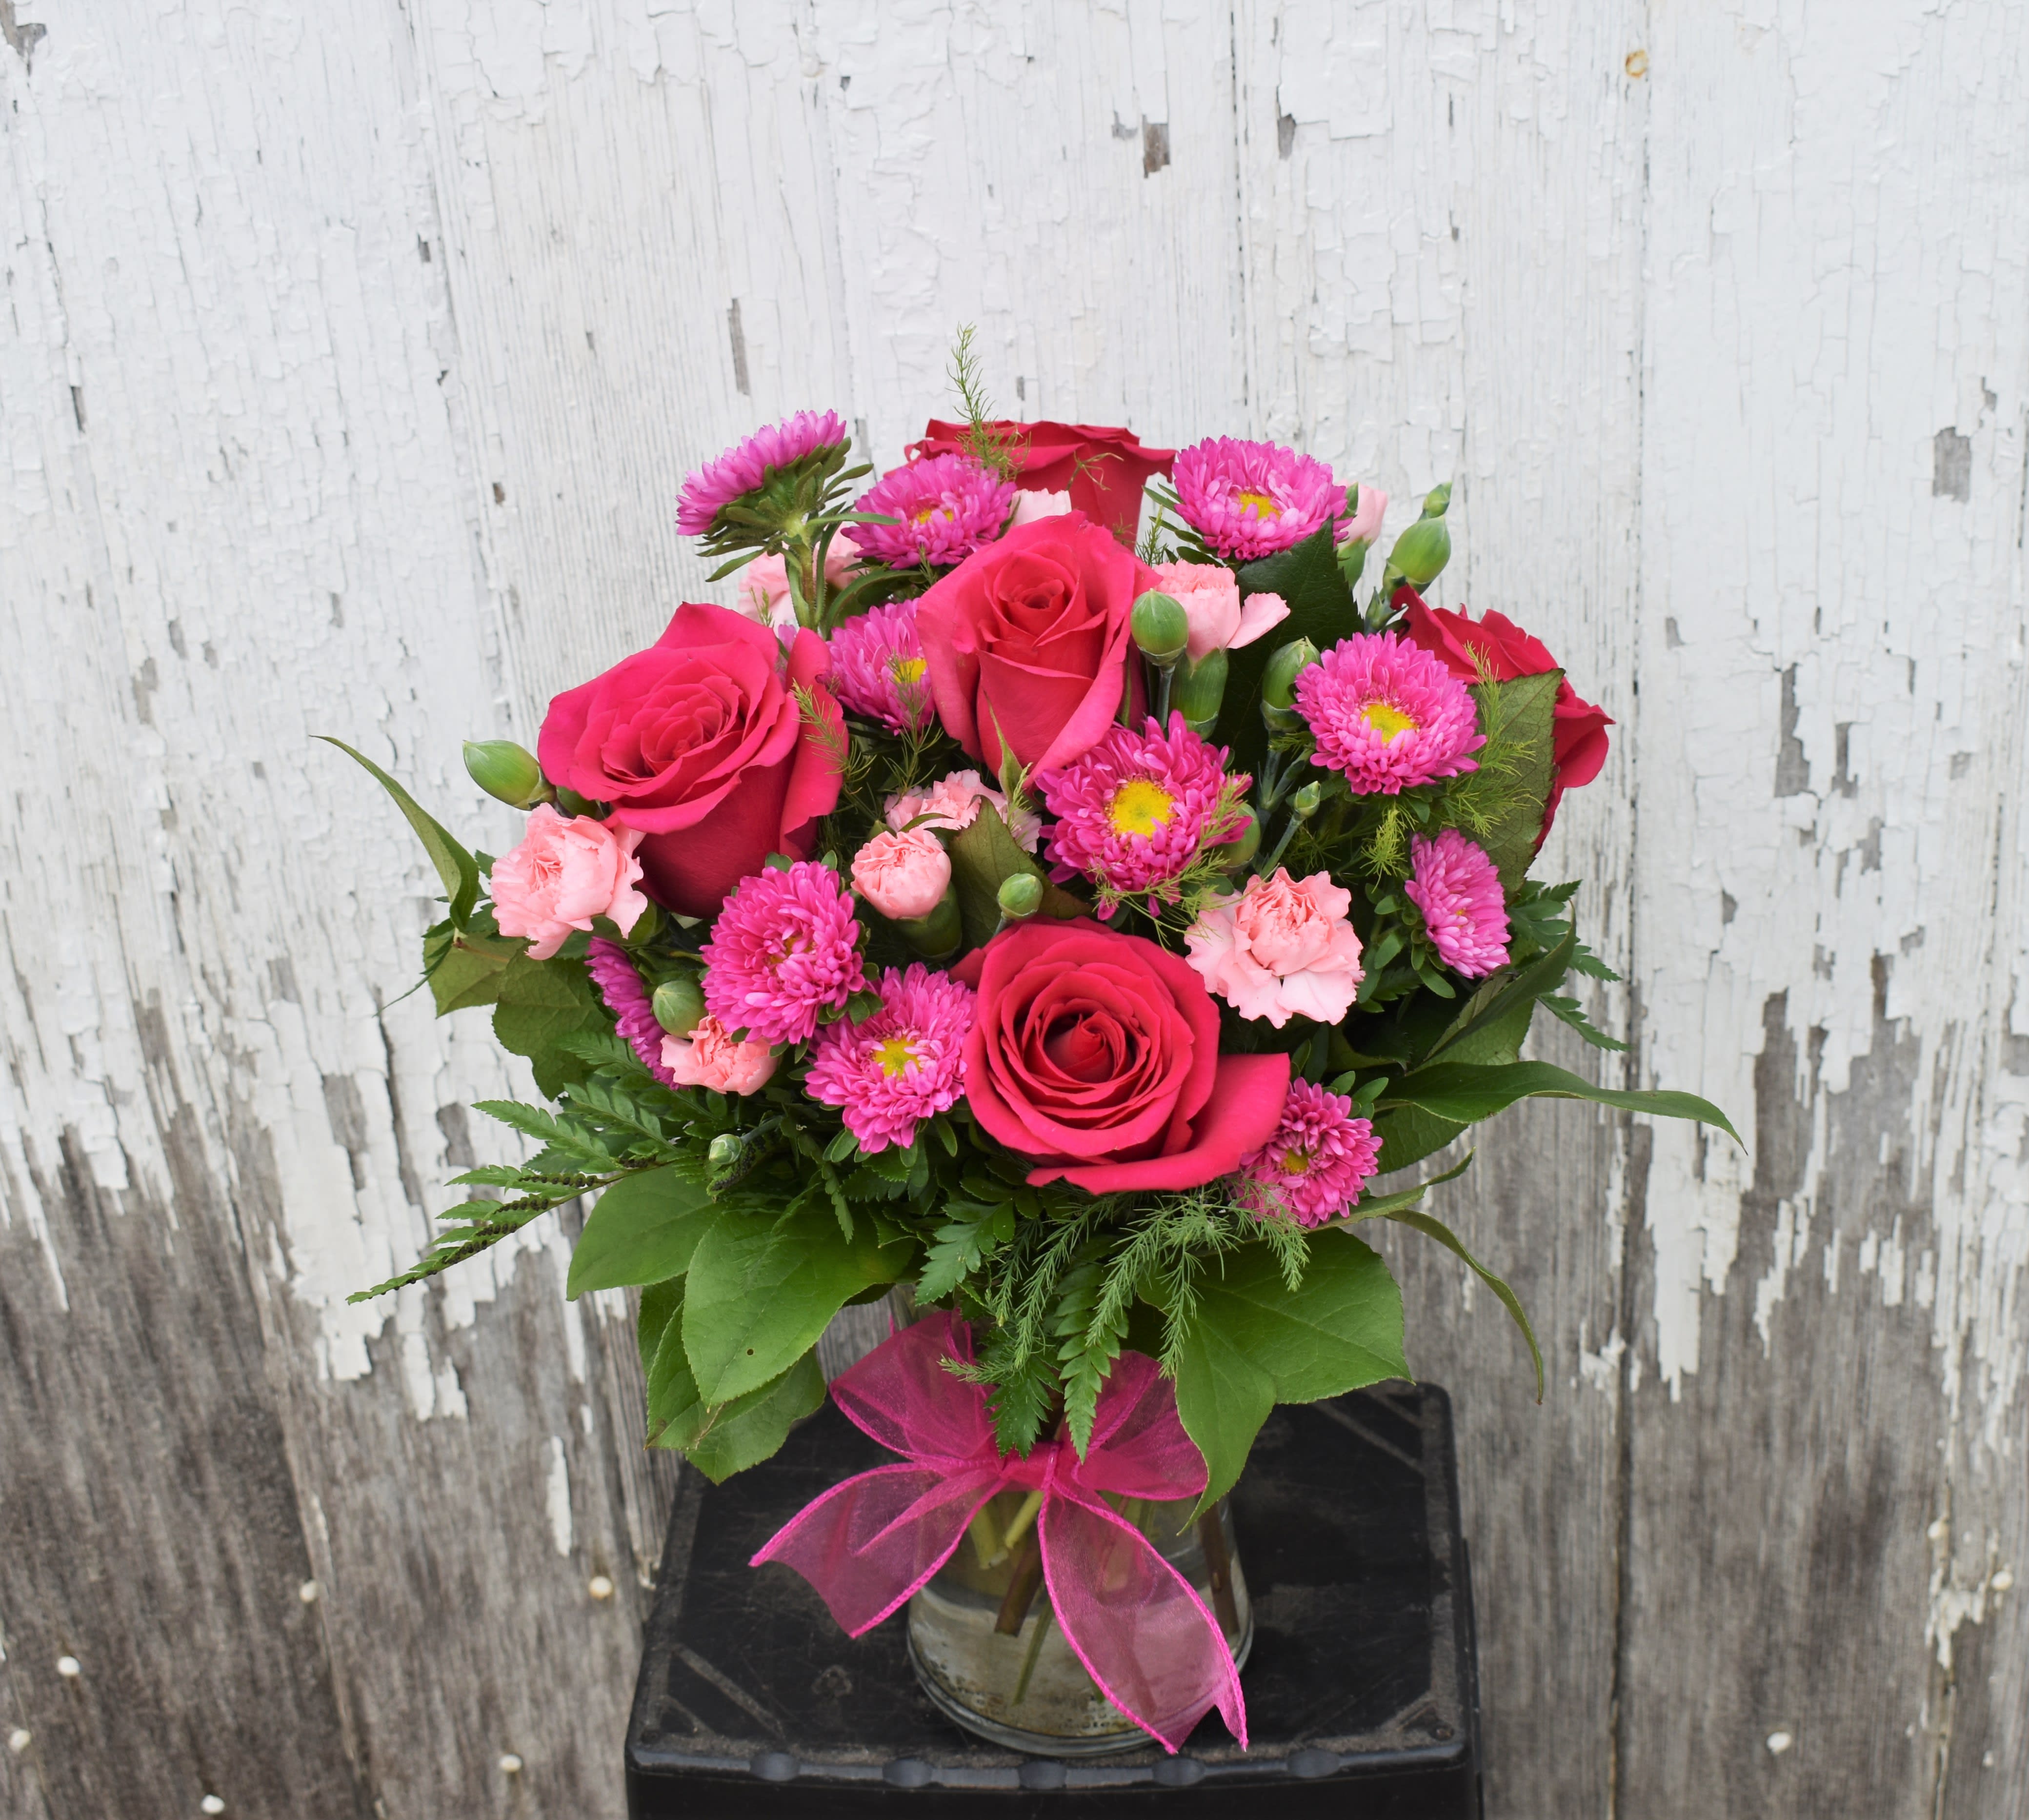 Precious Heart Bouquet - This bouquet is a blushing display of loving kindness. Fuchsia roses are sweetly stunning amongst pink matsumoto asters, pink mini carnations and lush greens. Arranged in a classic clear glass vase, this bouquet boasts pink perfection to convey your warmest wishes. 